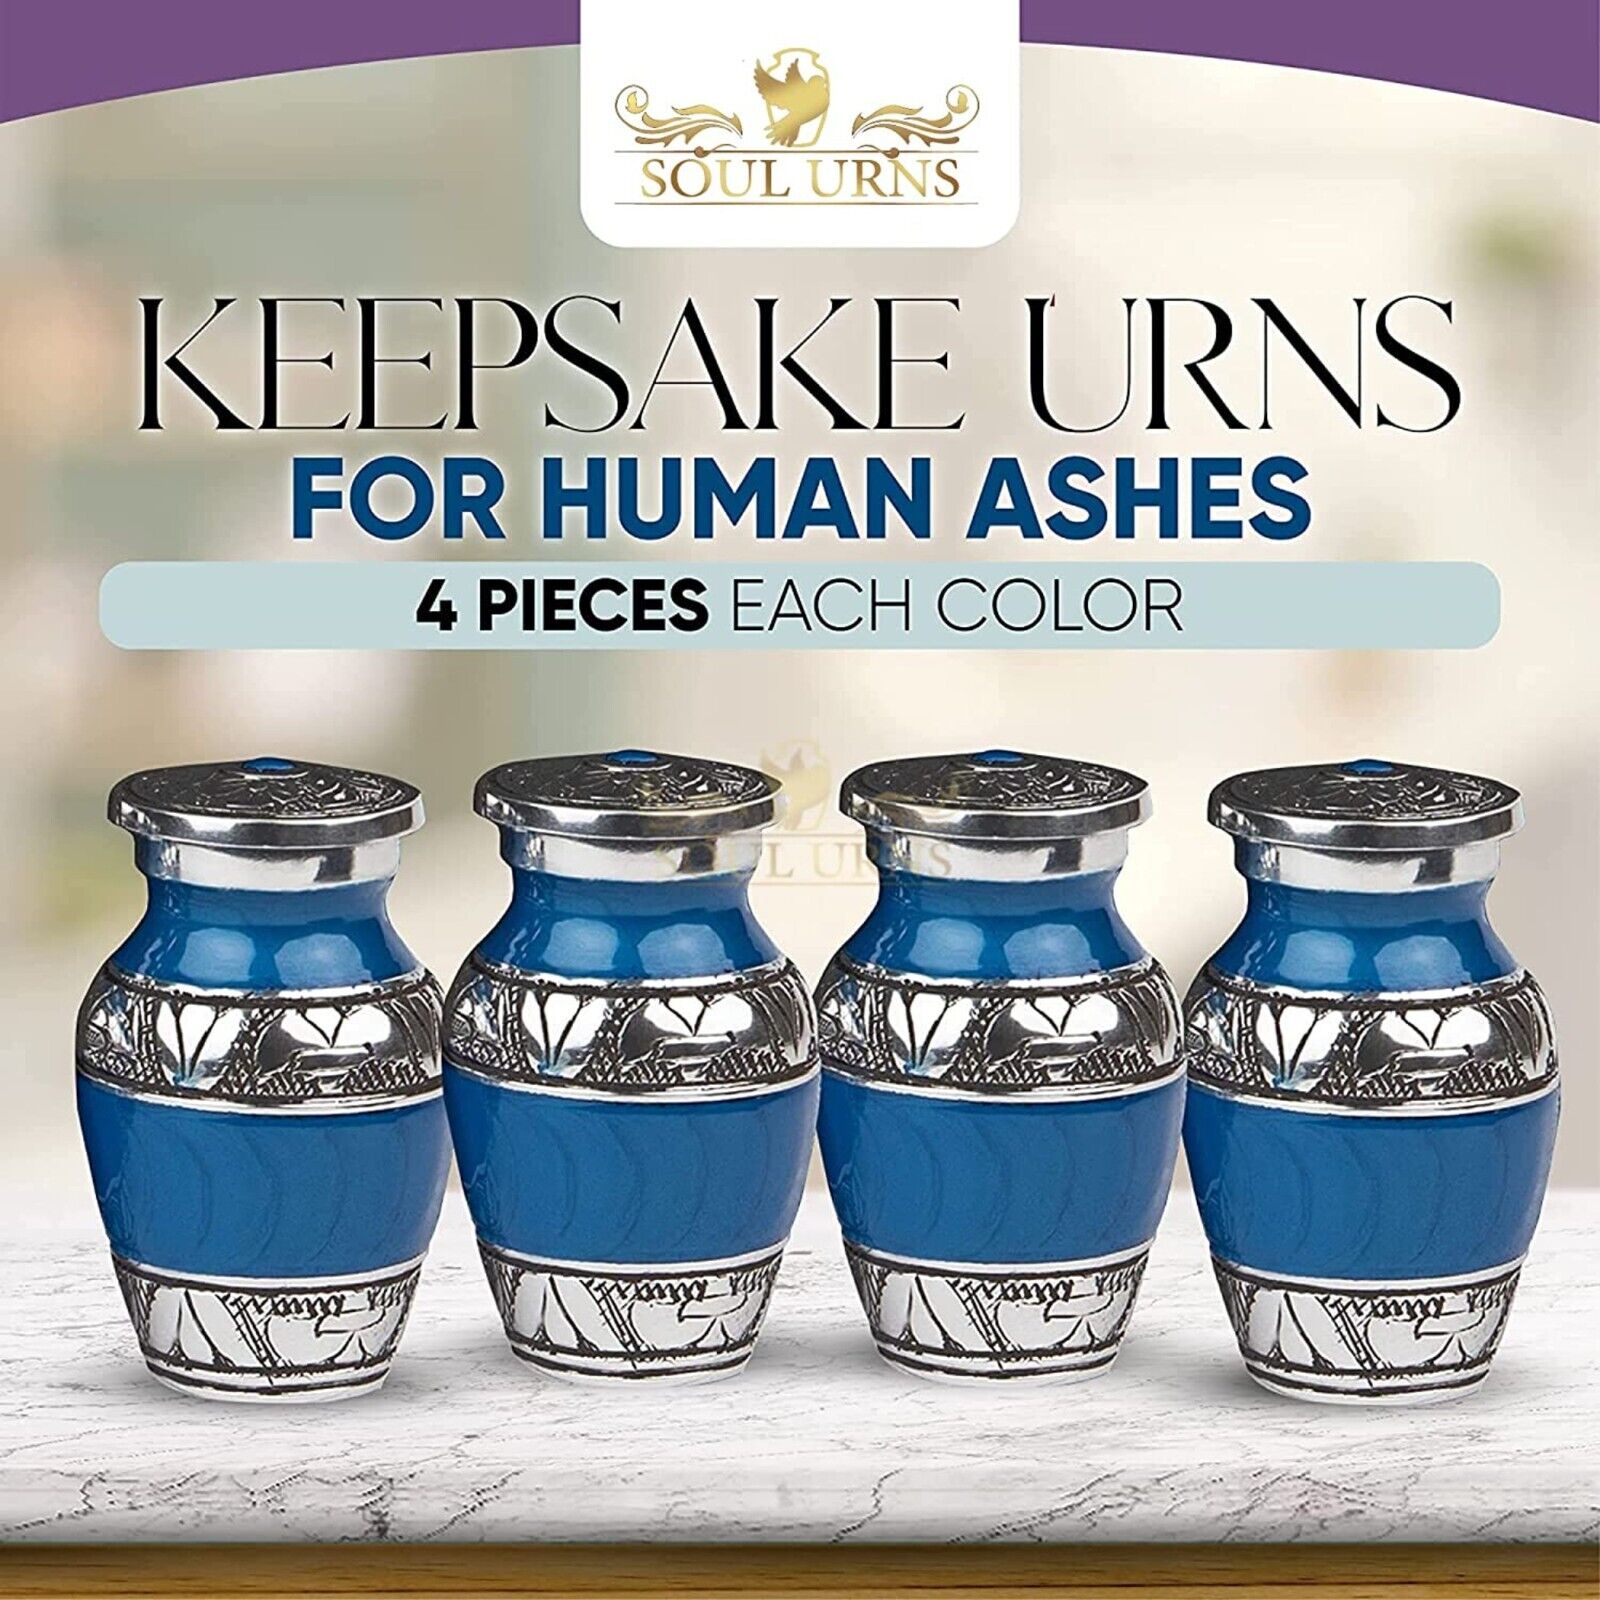 Blue With Silver Bands Small Keepsake Urns for Human Ashes - Set of 4